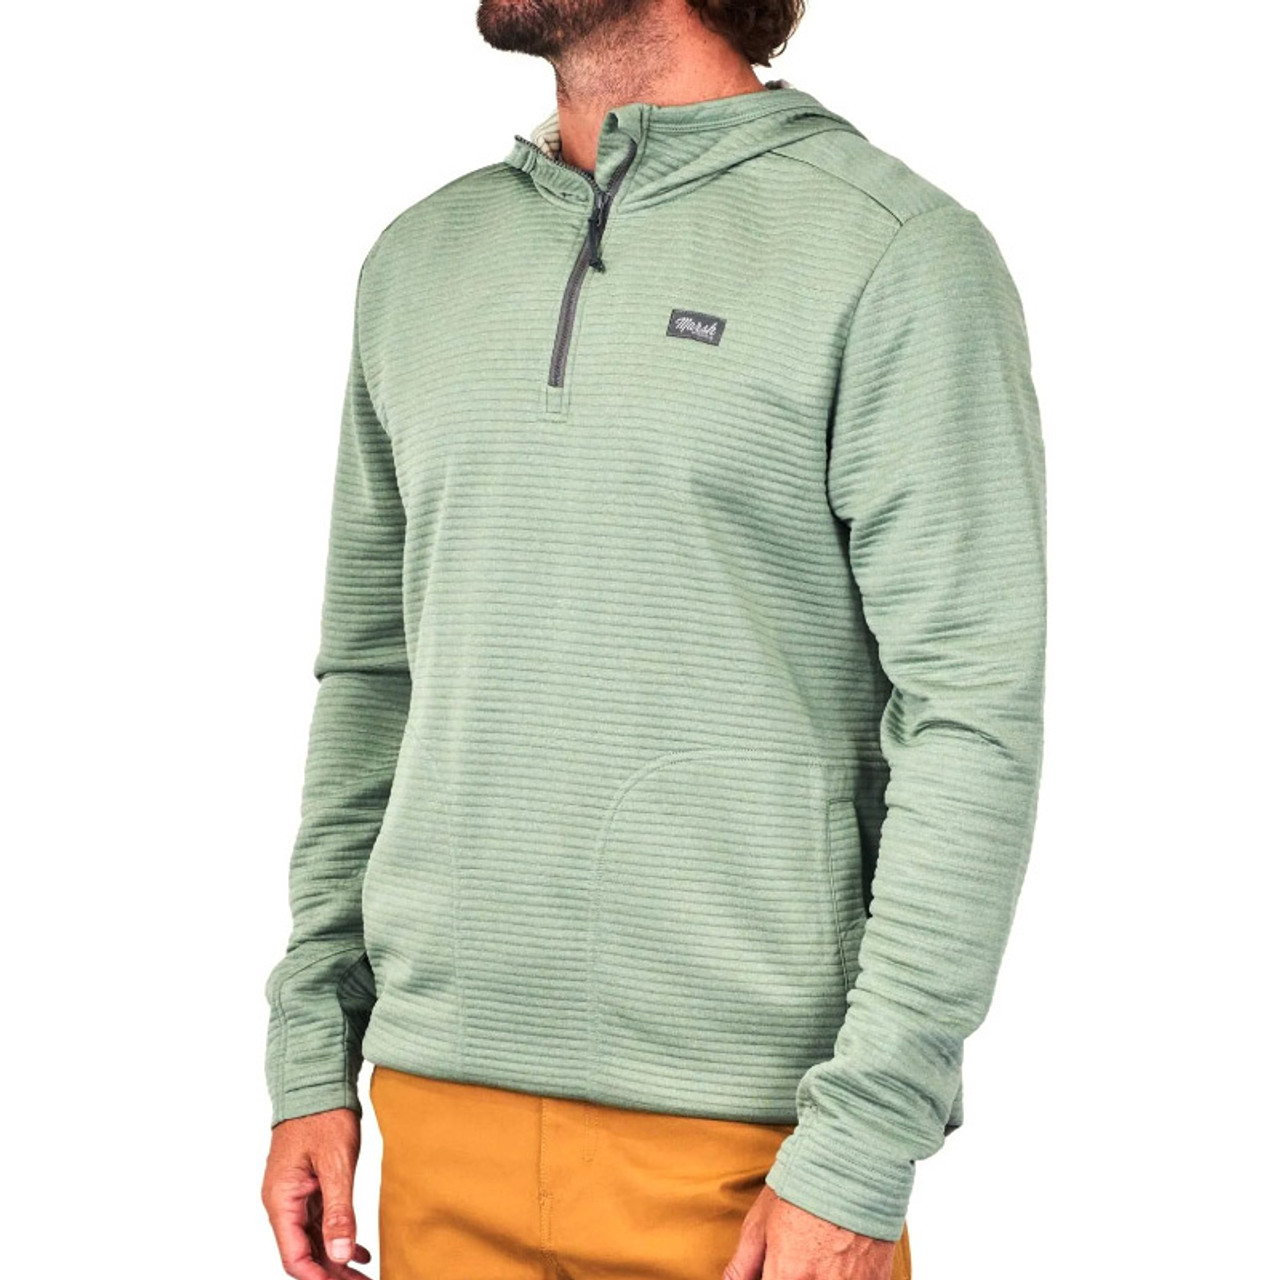 Sullivan Lily Pad Green Tech Hoodie by Marsh Wear - Lifestyle